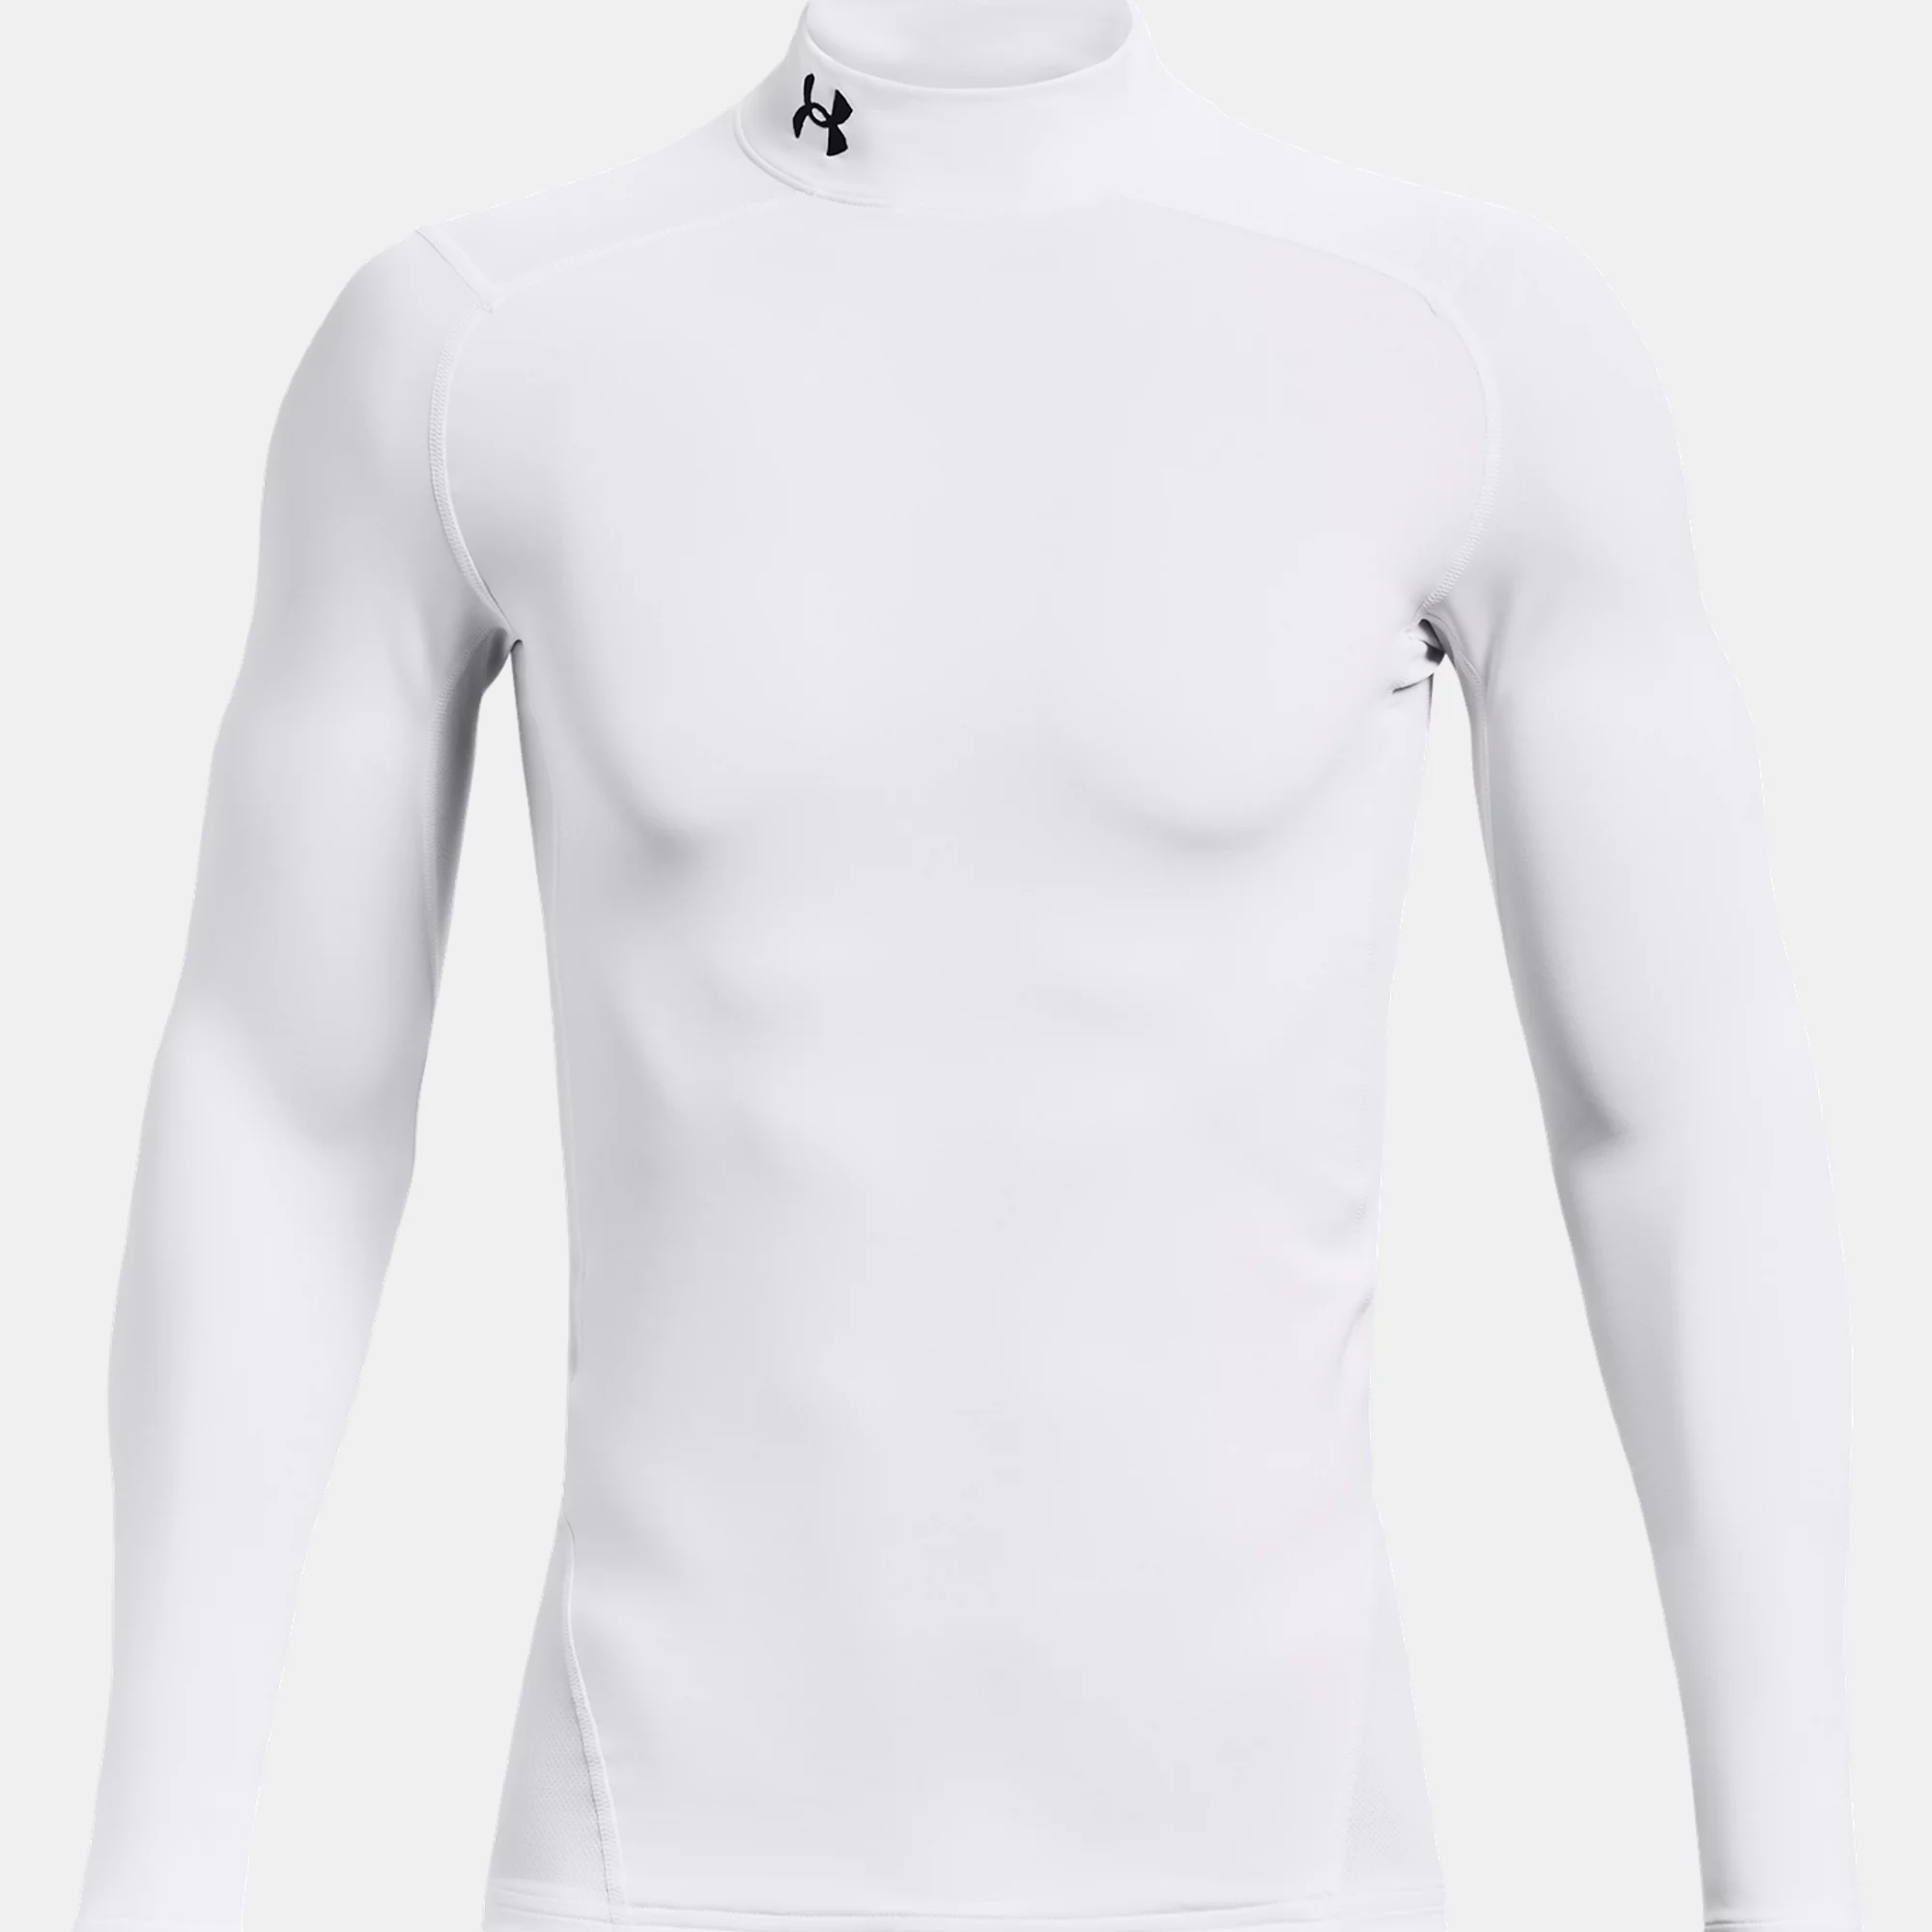 Wear Ease 914 Taylor T - Long Sleeve, Compression For Underarm